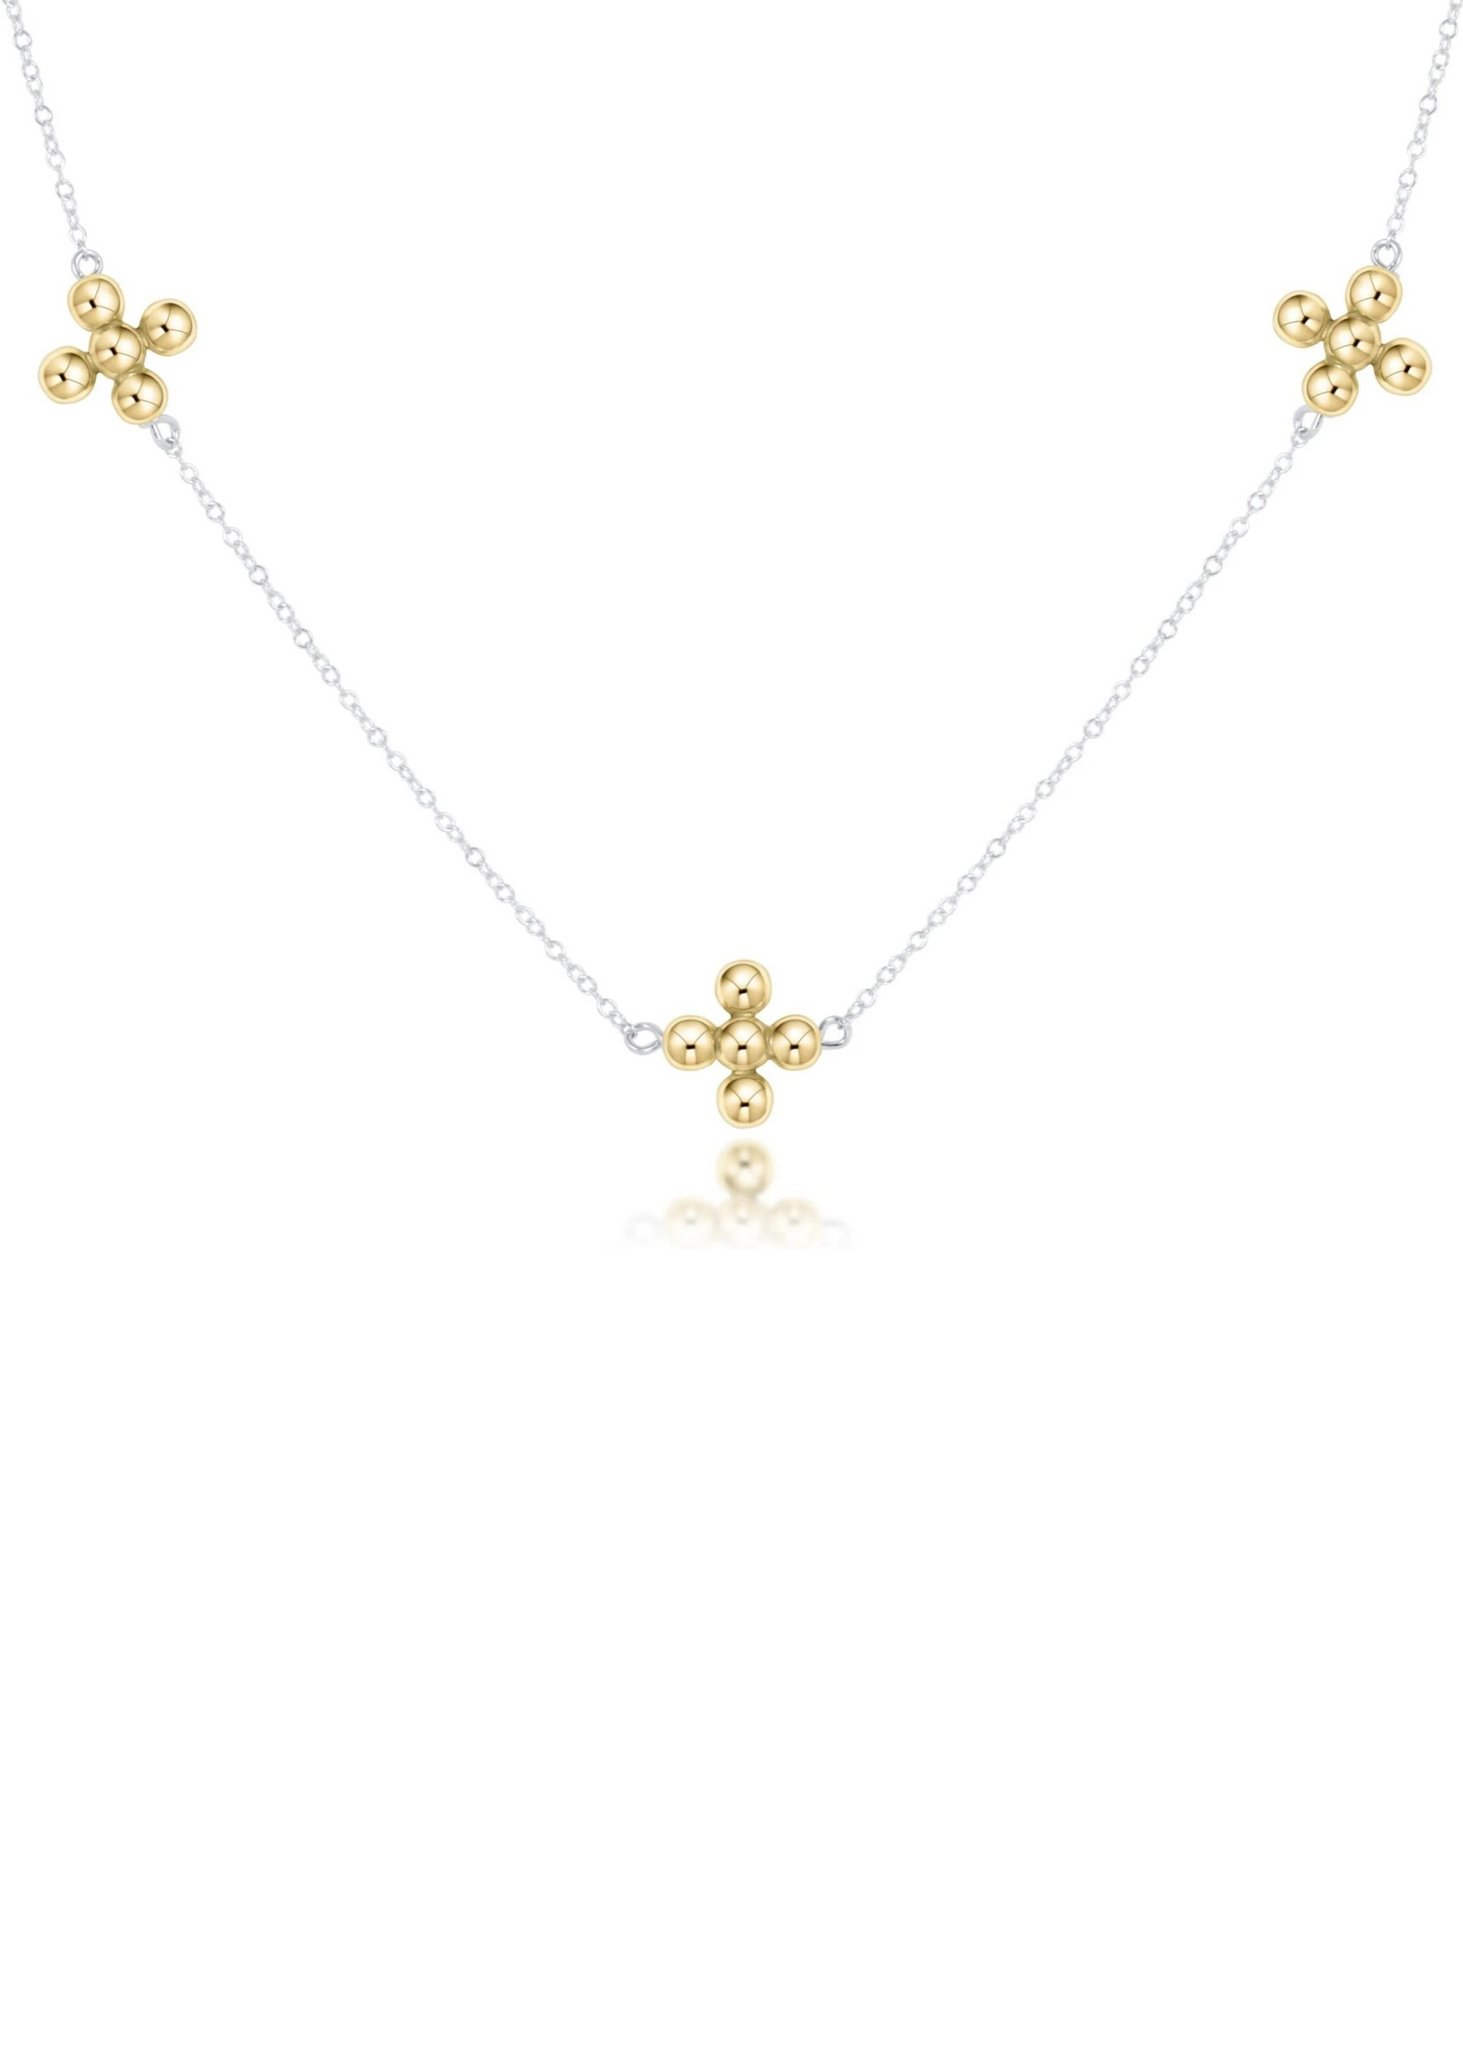 15" Choker Simplicity Chain Sterling Mixed Metal - Classic Beaded Signature Cross Gold